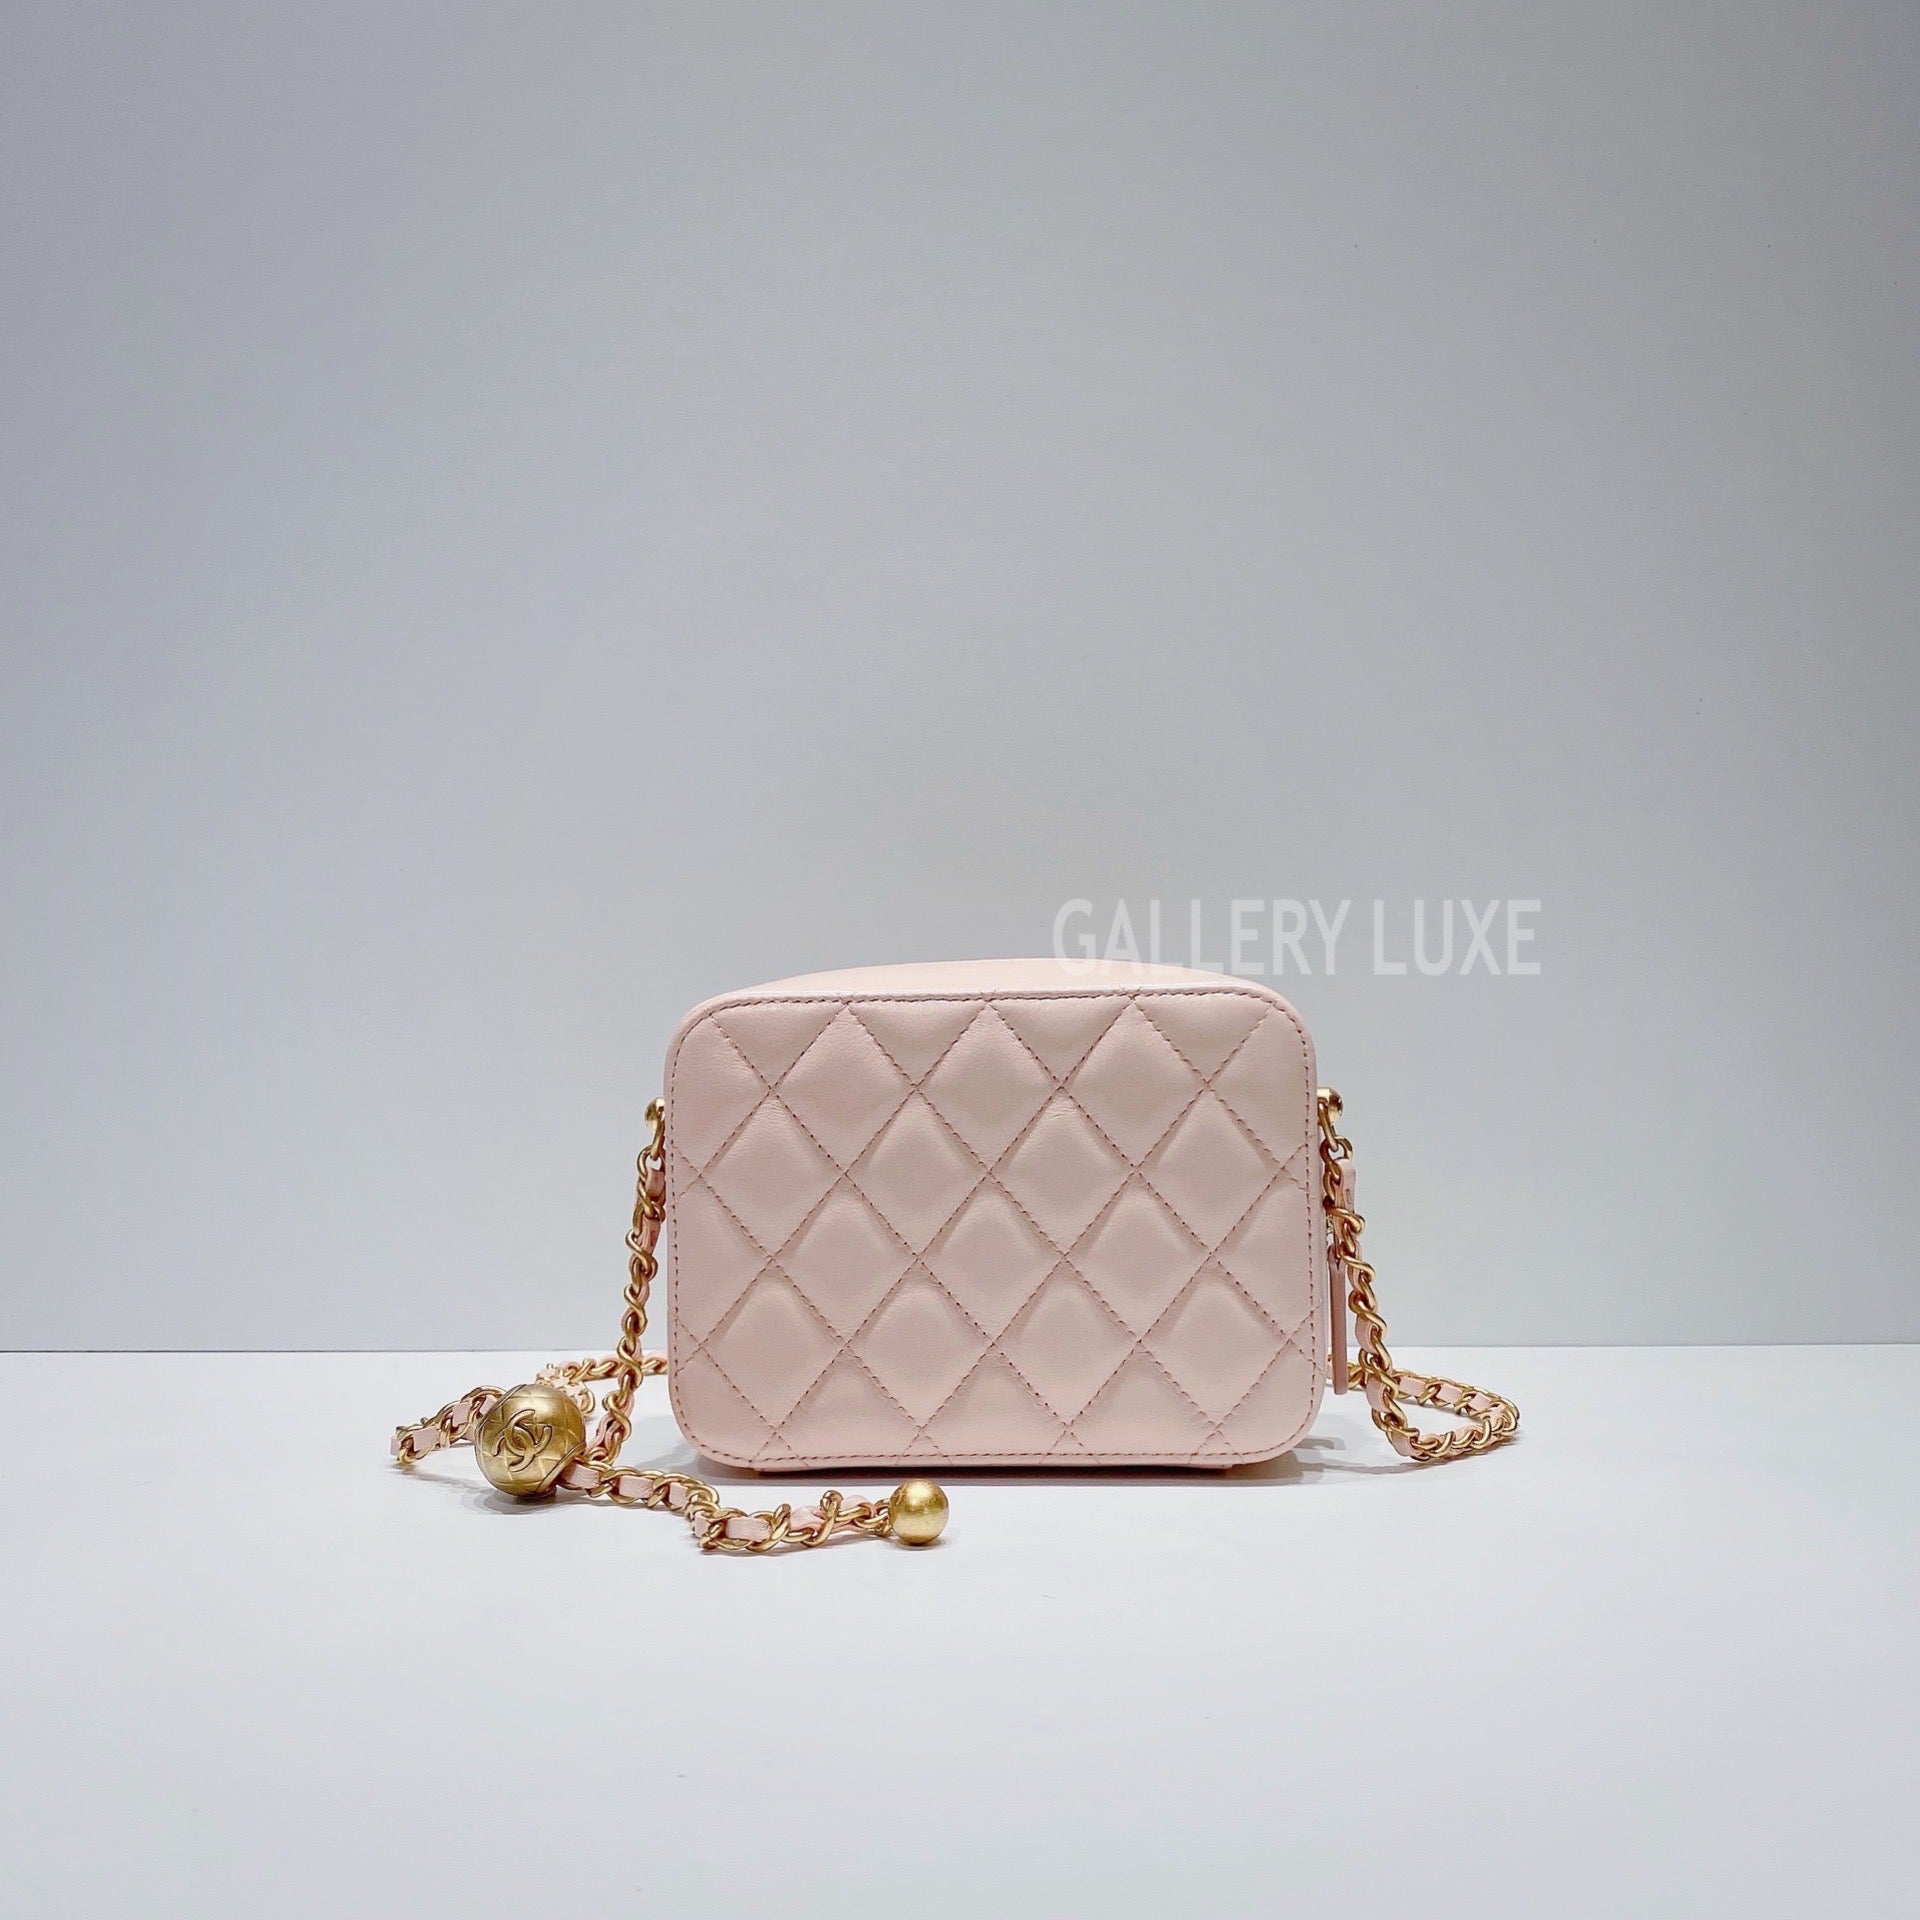 Chanel Pearl Crush Square Mini.. My Thoughts and Hesitations